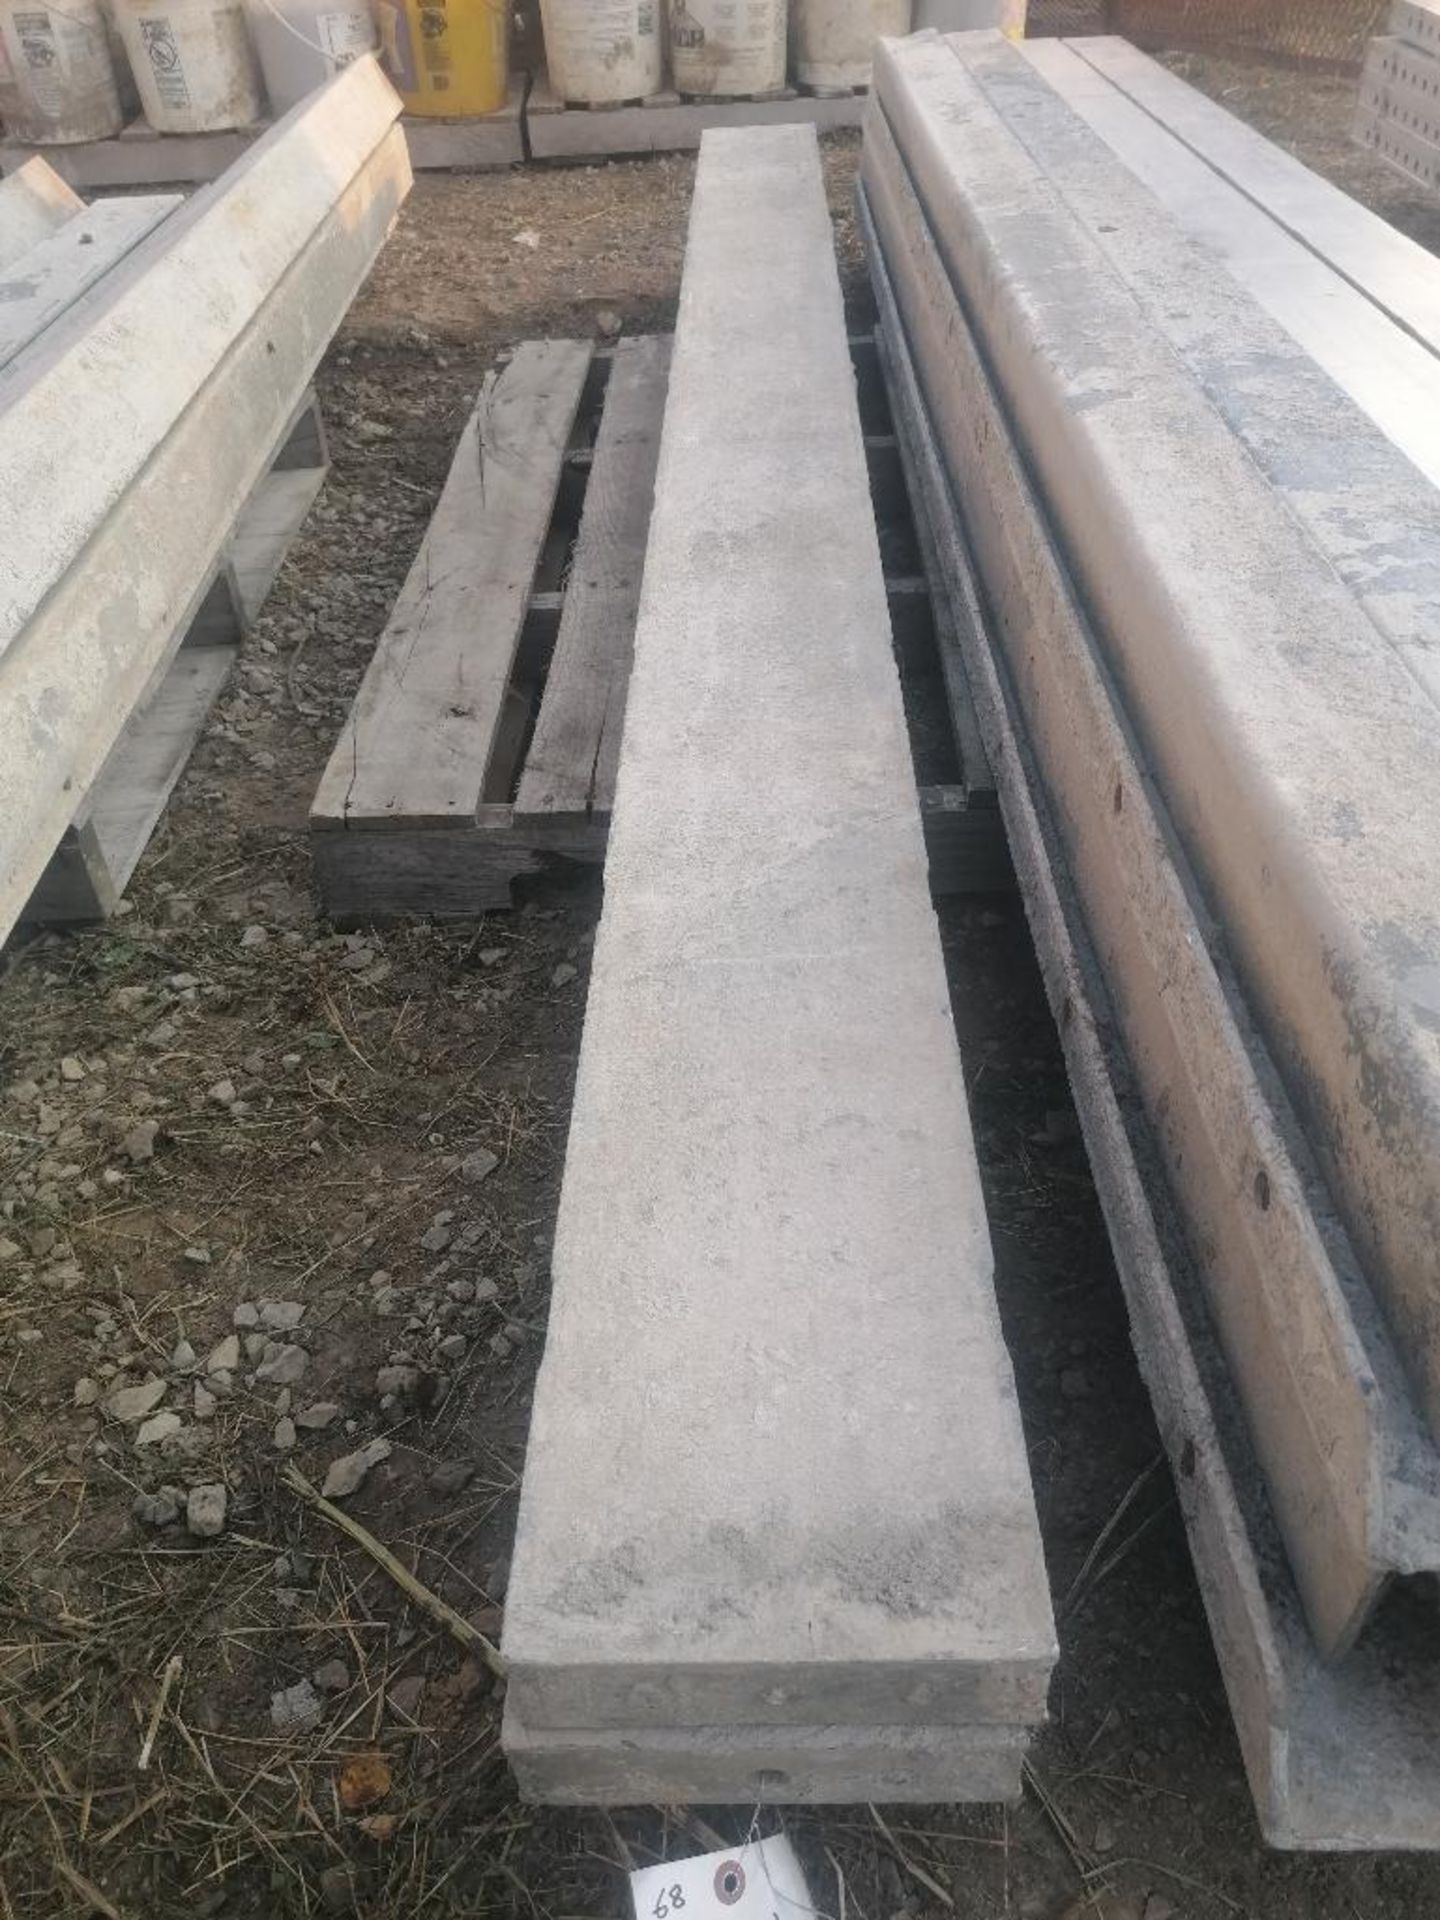 (2) 8" x 9' Smooth Aluminum Concrete Forms 6-12 Hole Pattern. Located in Ixonia, WI